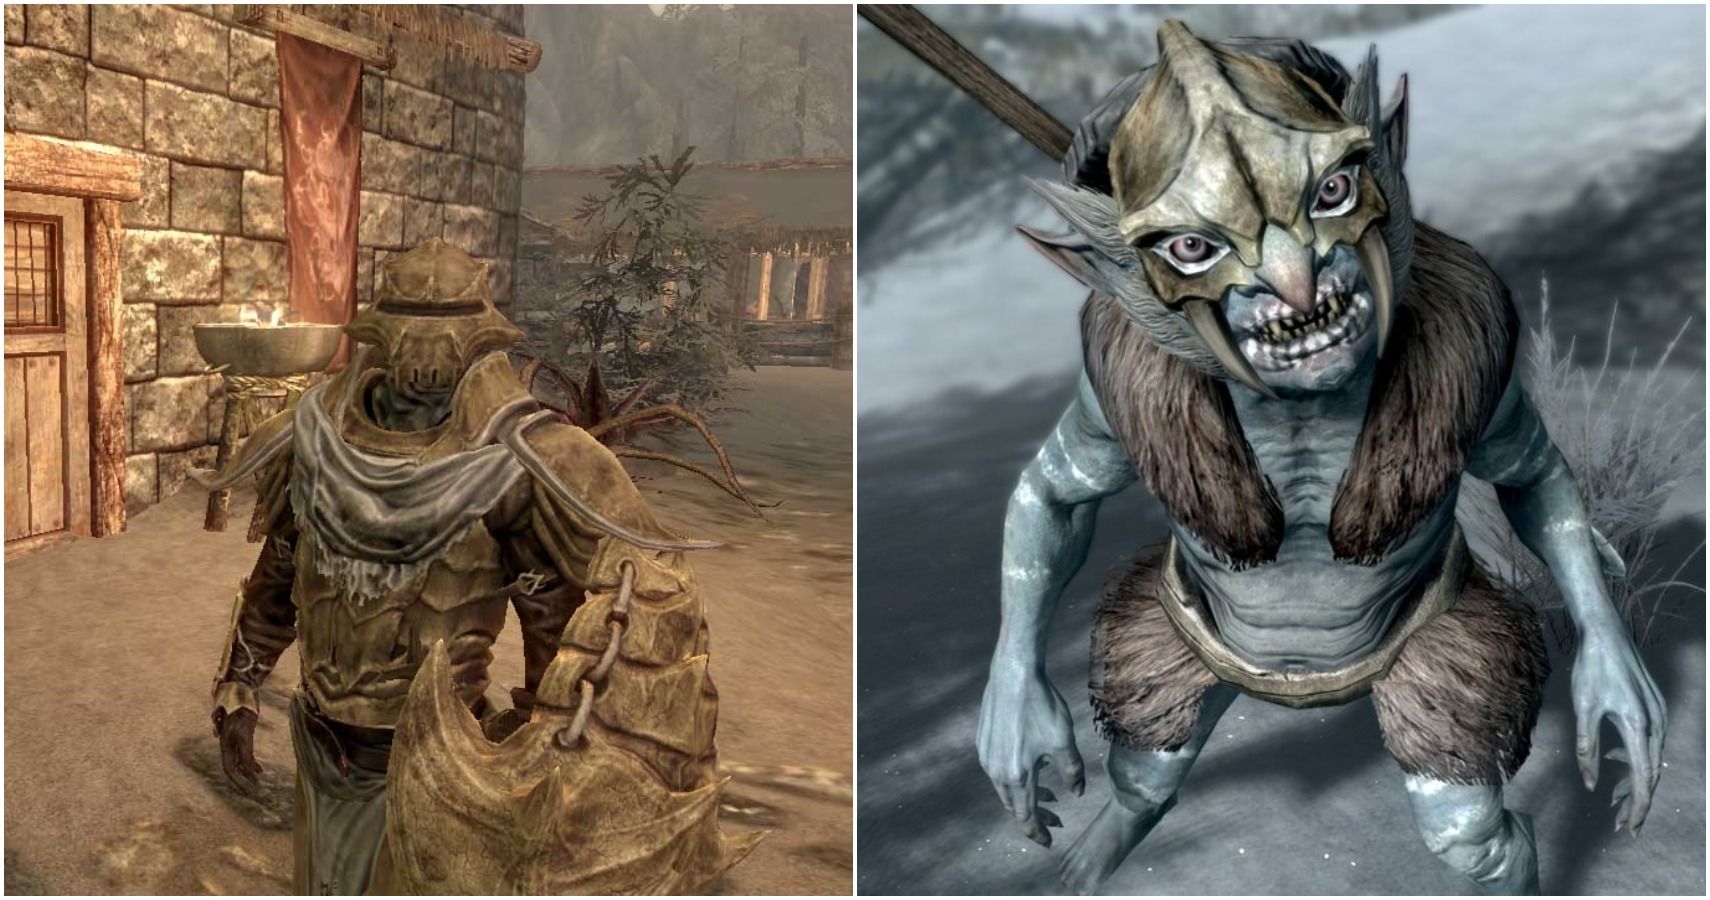 Ten Skyrim Secrets You May Not Have Known About